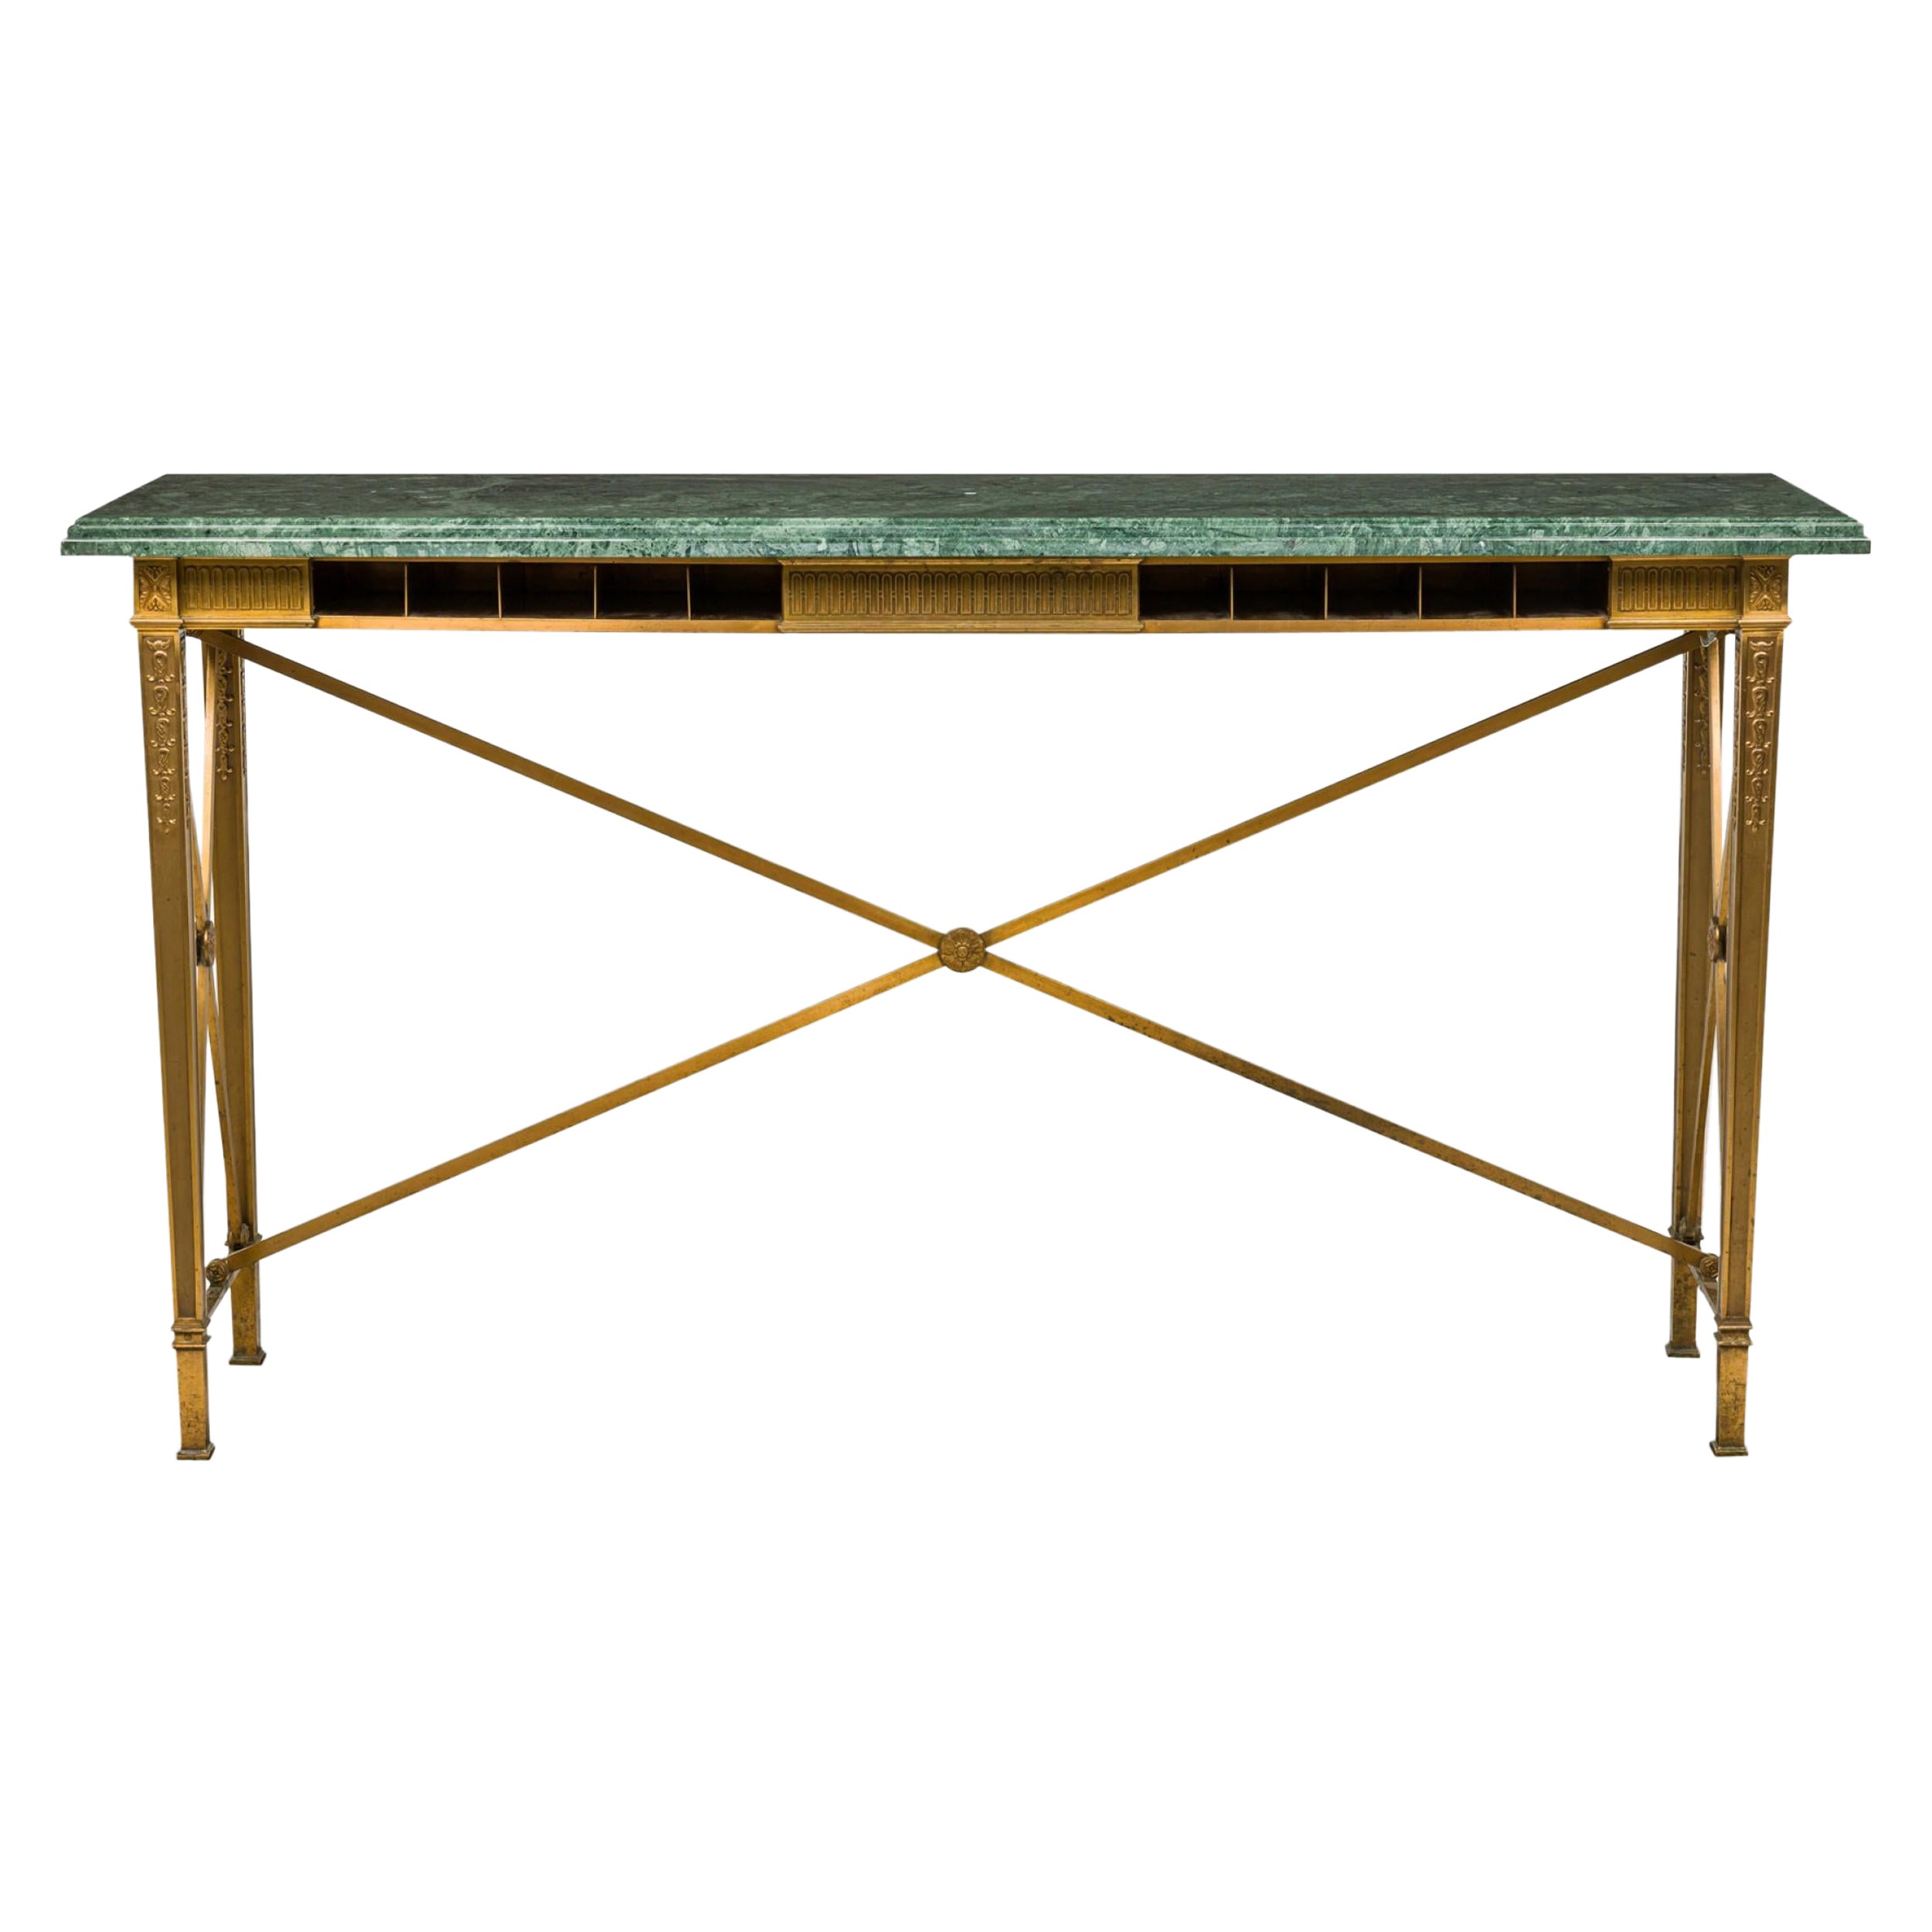 American Art Deco Bronze and Marble Bank Console Table